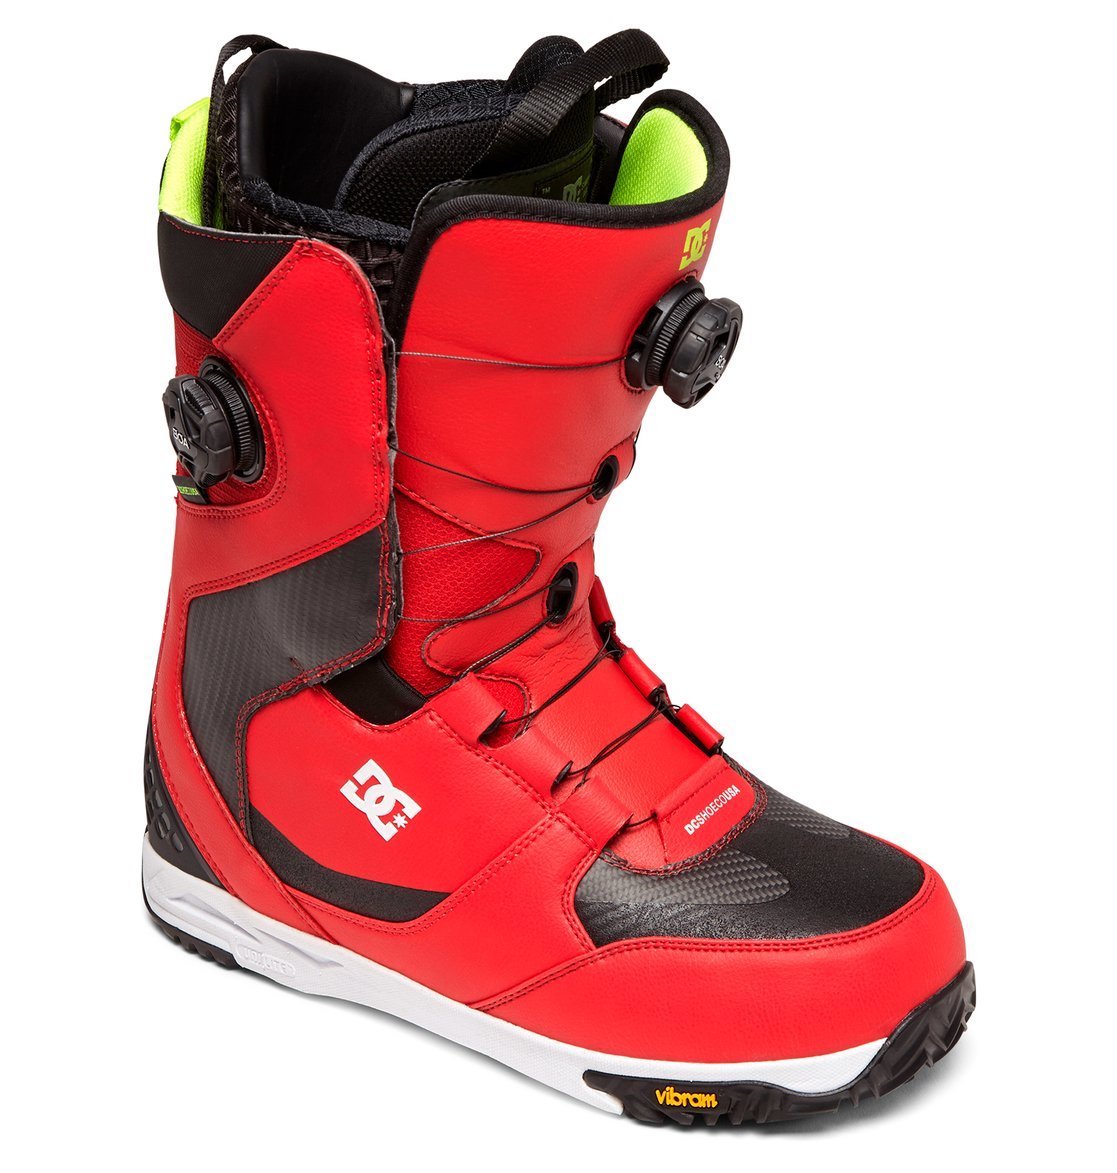 Snowboard Boots Purchasing Guide